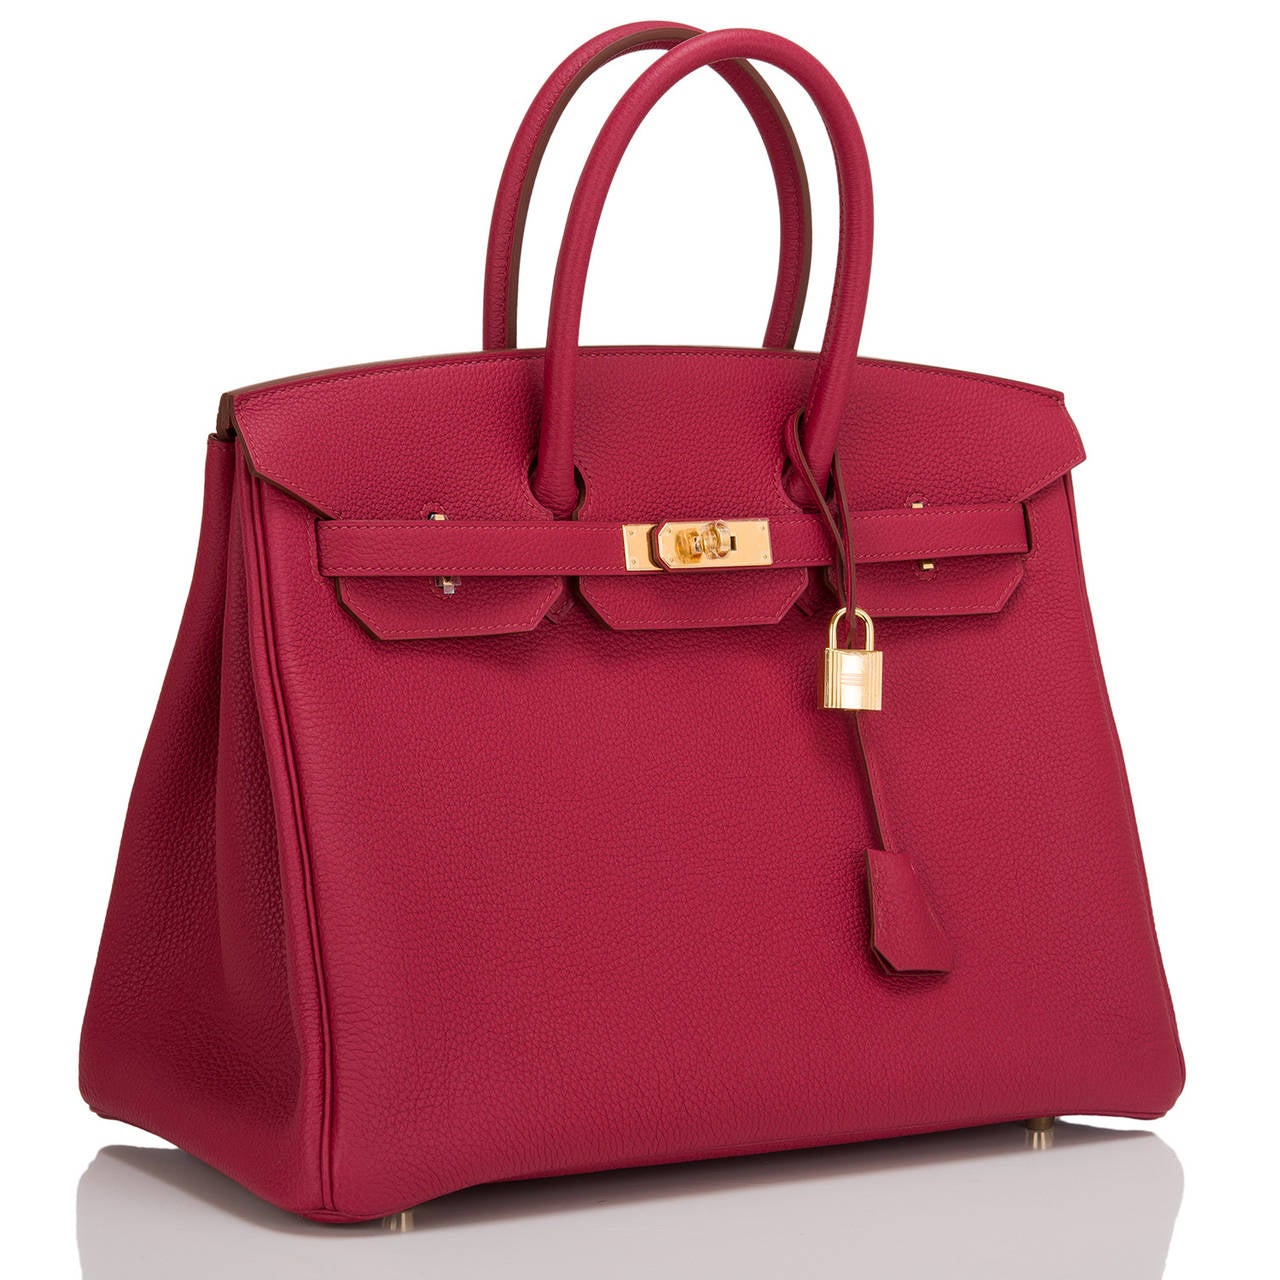 Hermes Rubis Birkin 35cm in togo (bull) leather with gold hardware.

This Birkin features tonal stitching, front toggle closure, clochette with lock and two keys, and double rolled handles. The interior is lined in Rubis chevre with one zip pocket